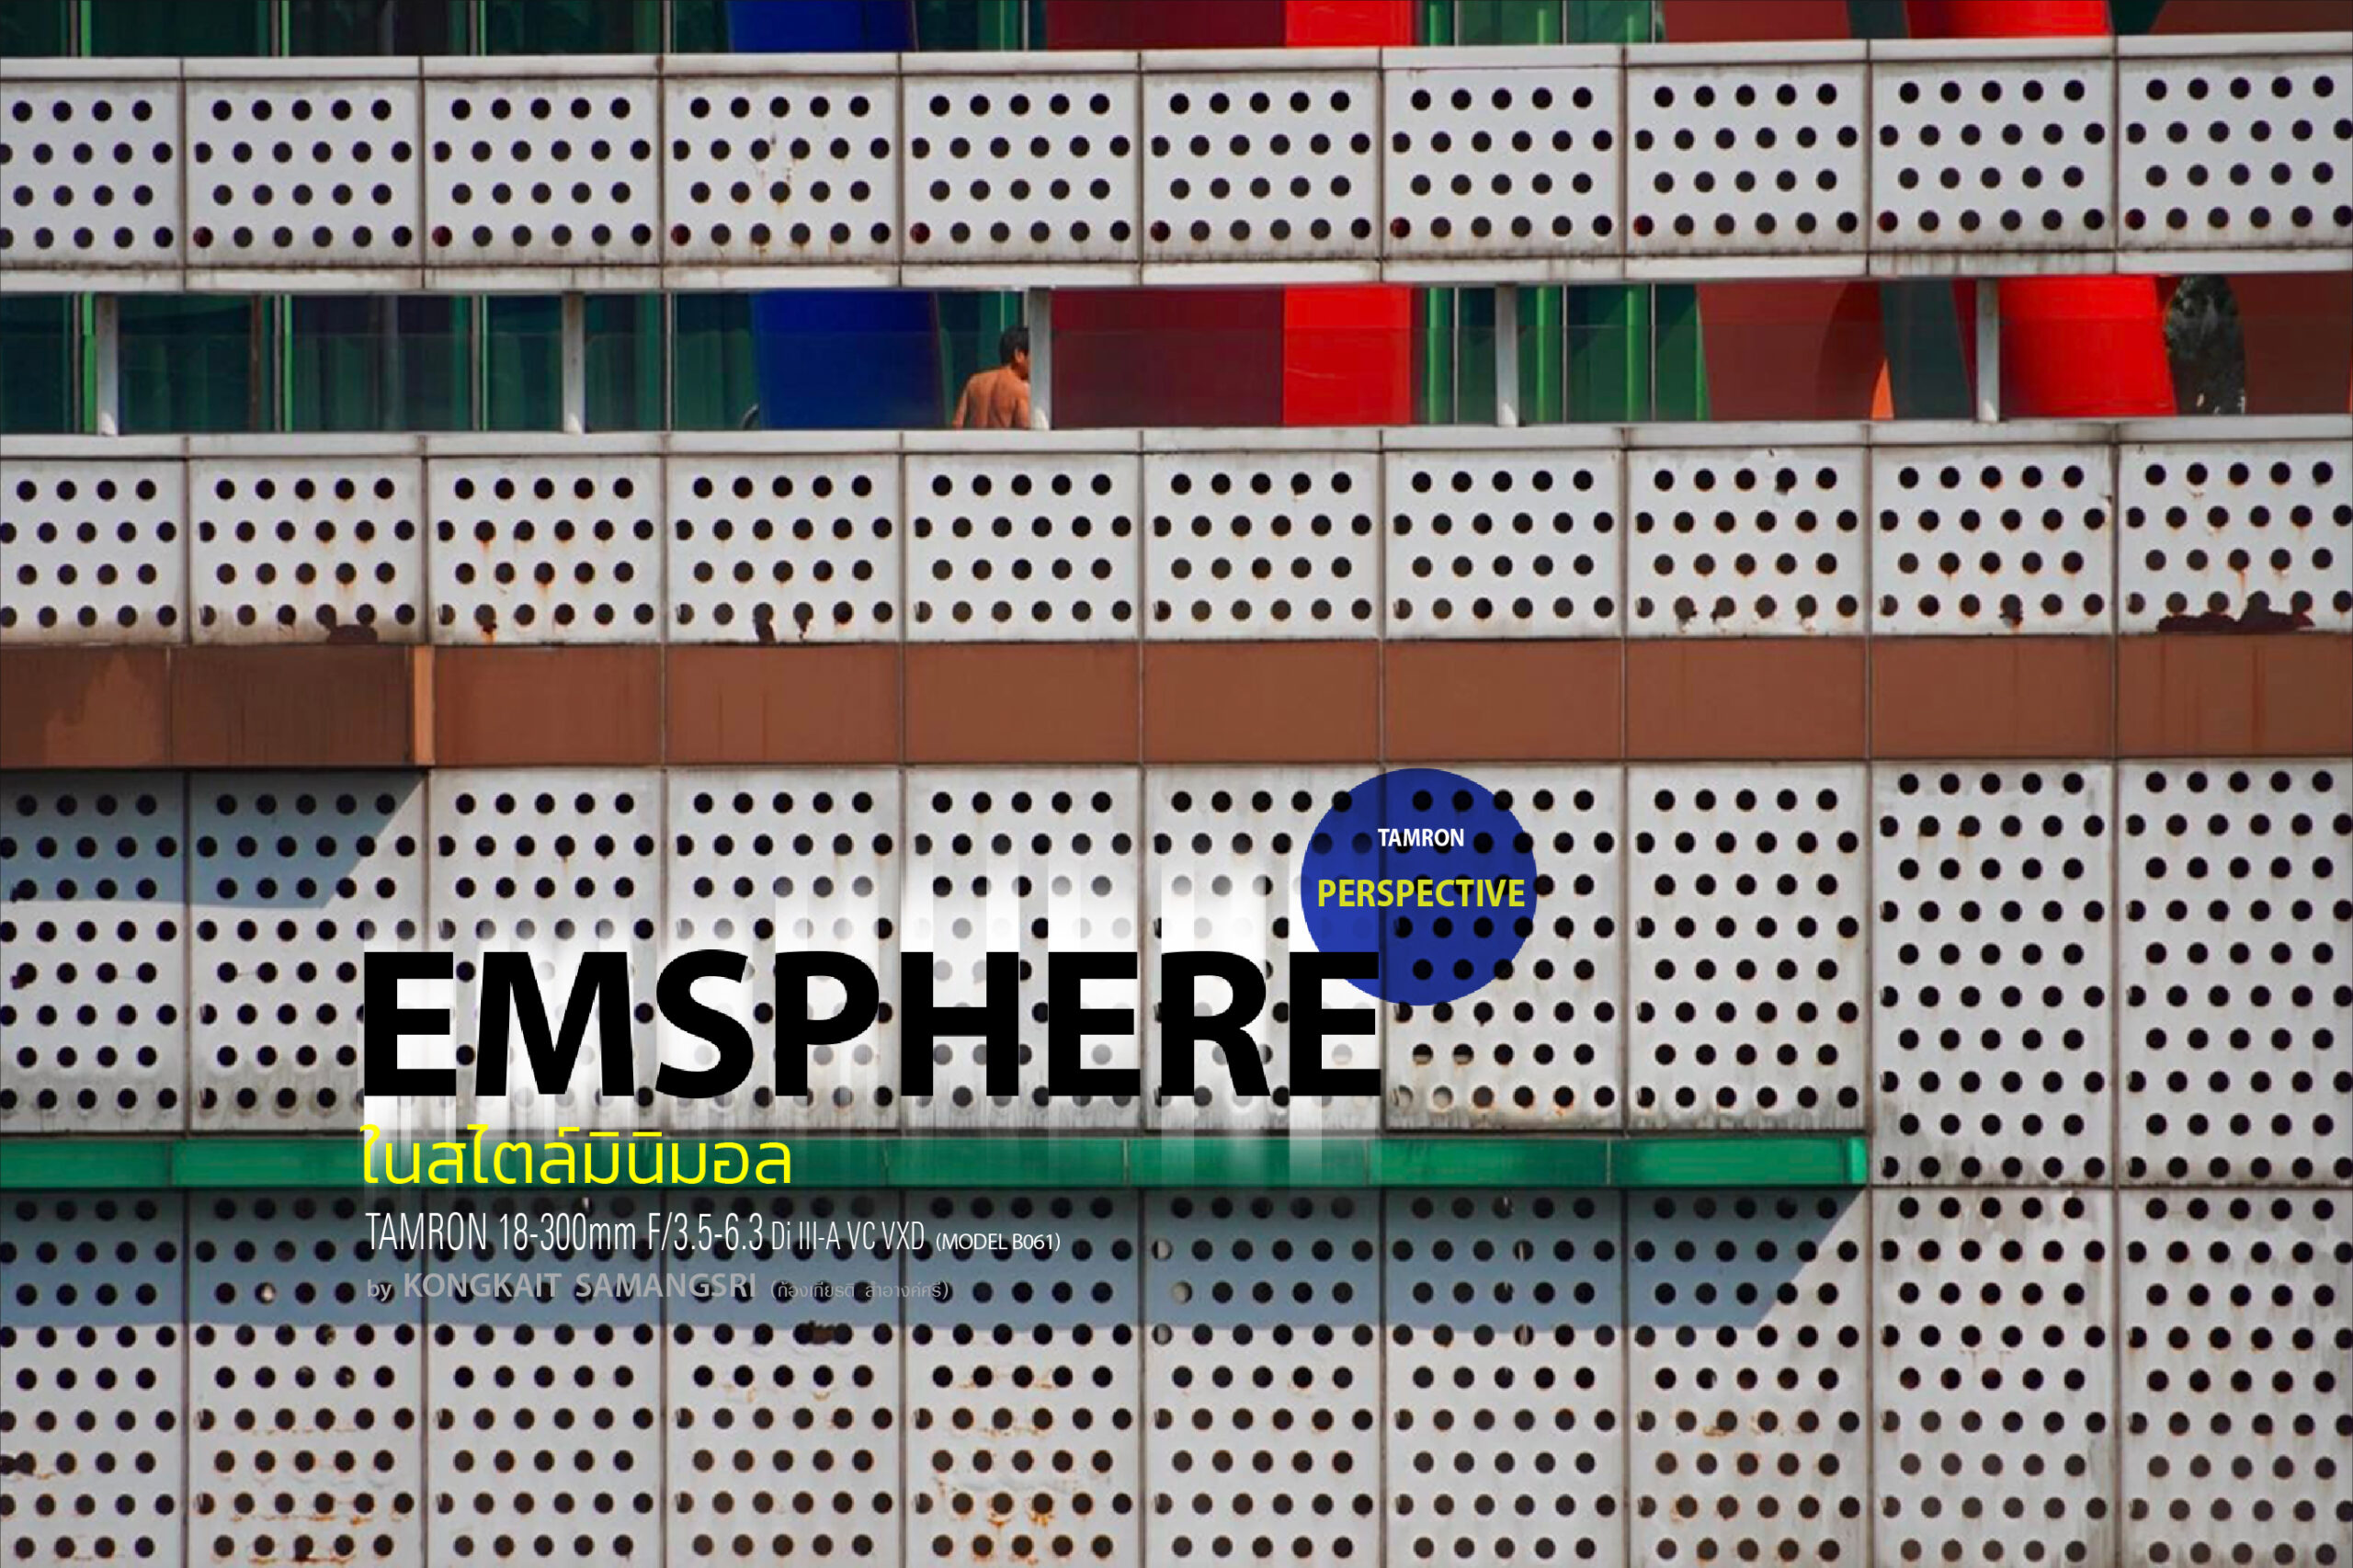 TAMRON PERSPECTIVE : EMSPHERE ในสไตล์มินิมอล  with B061